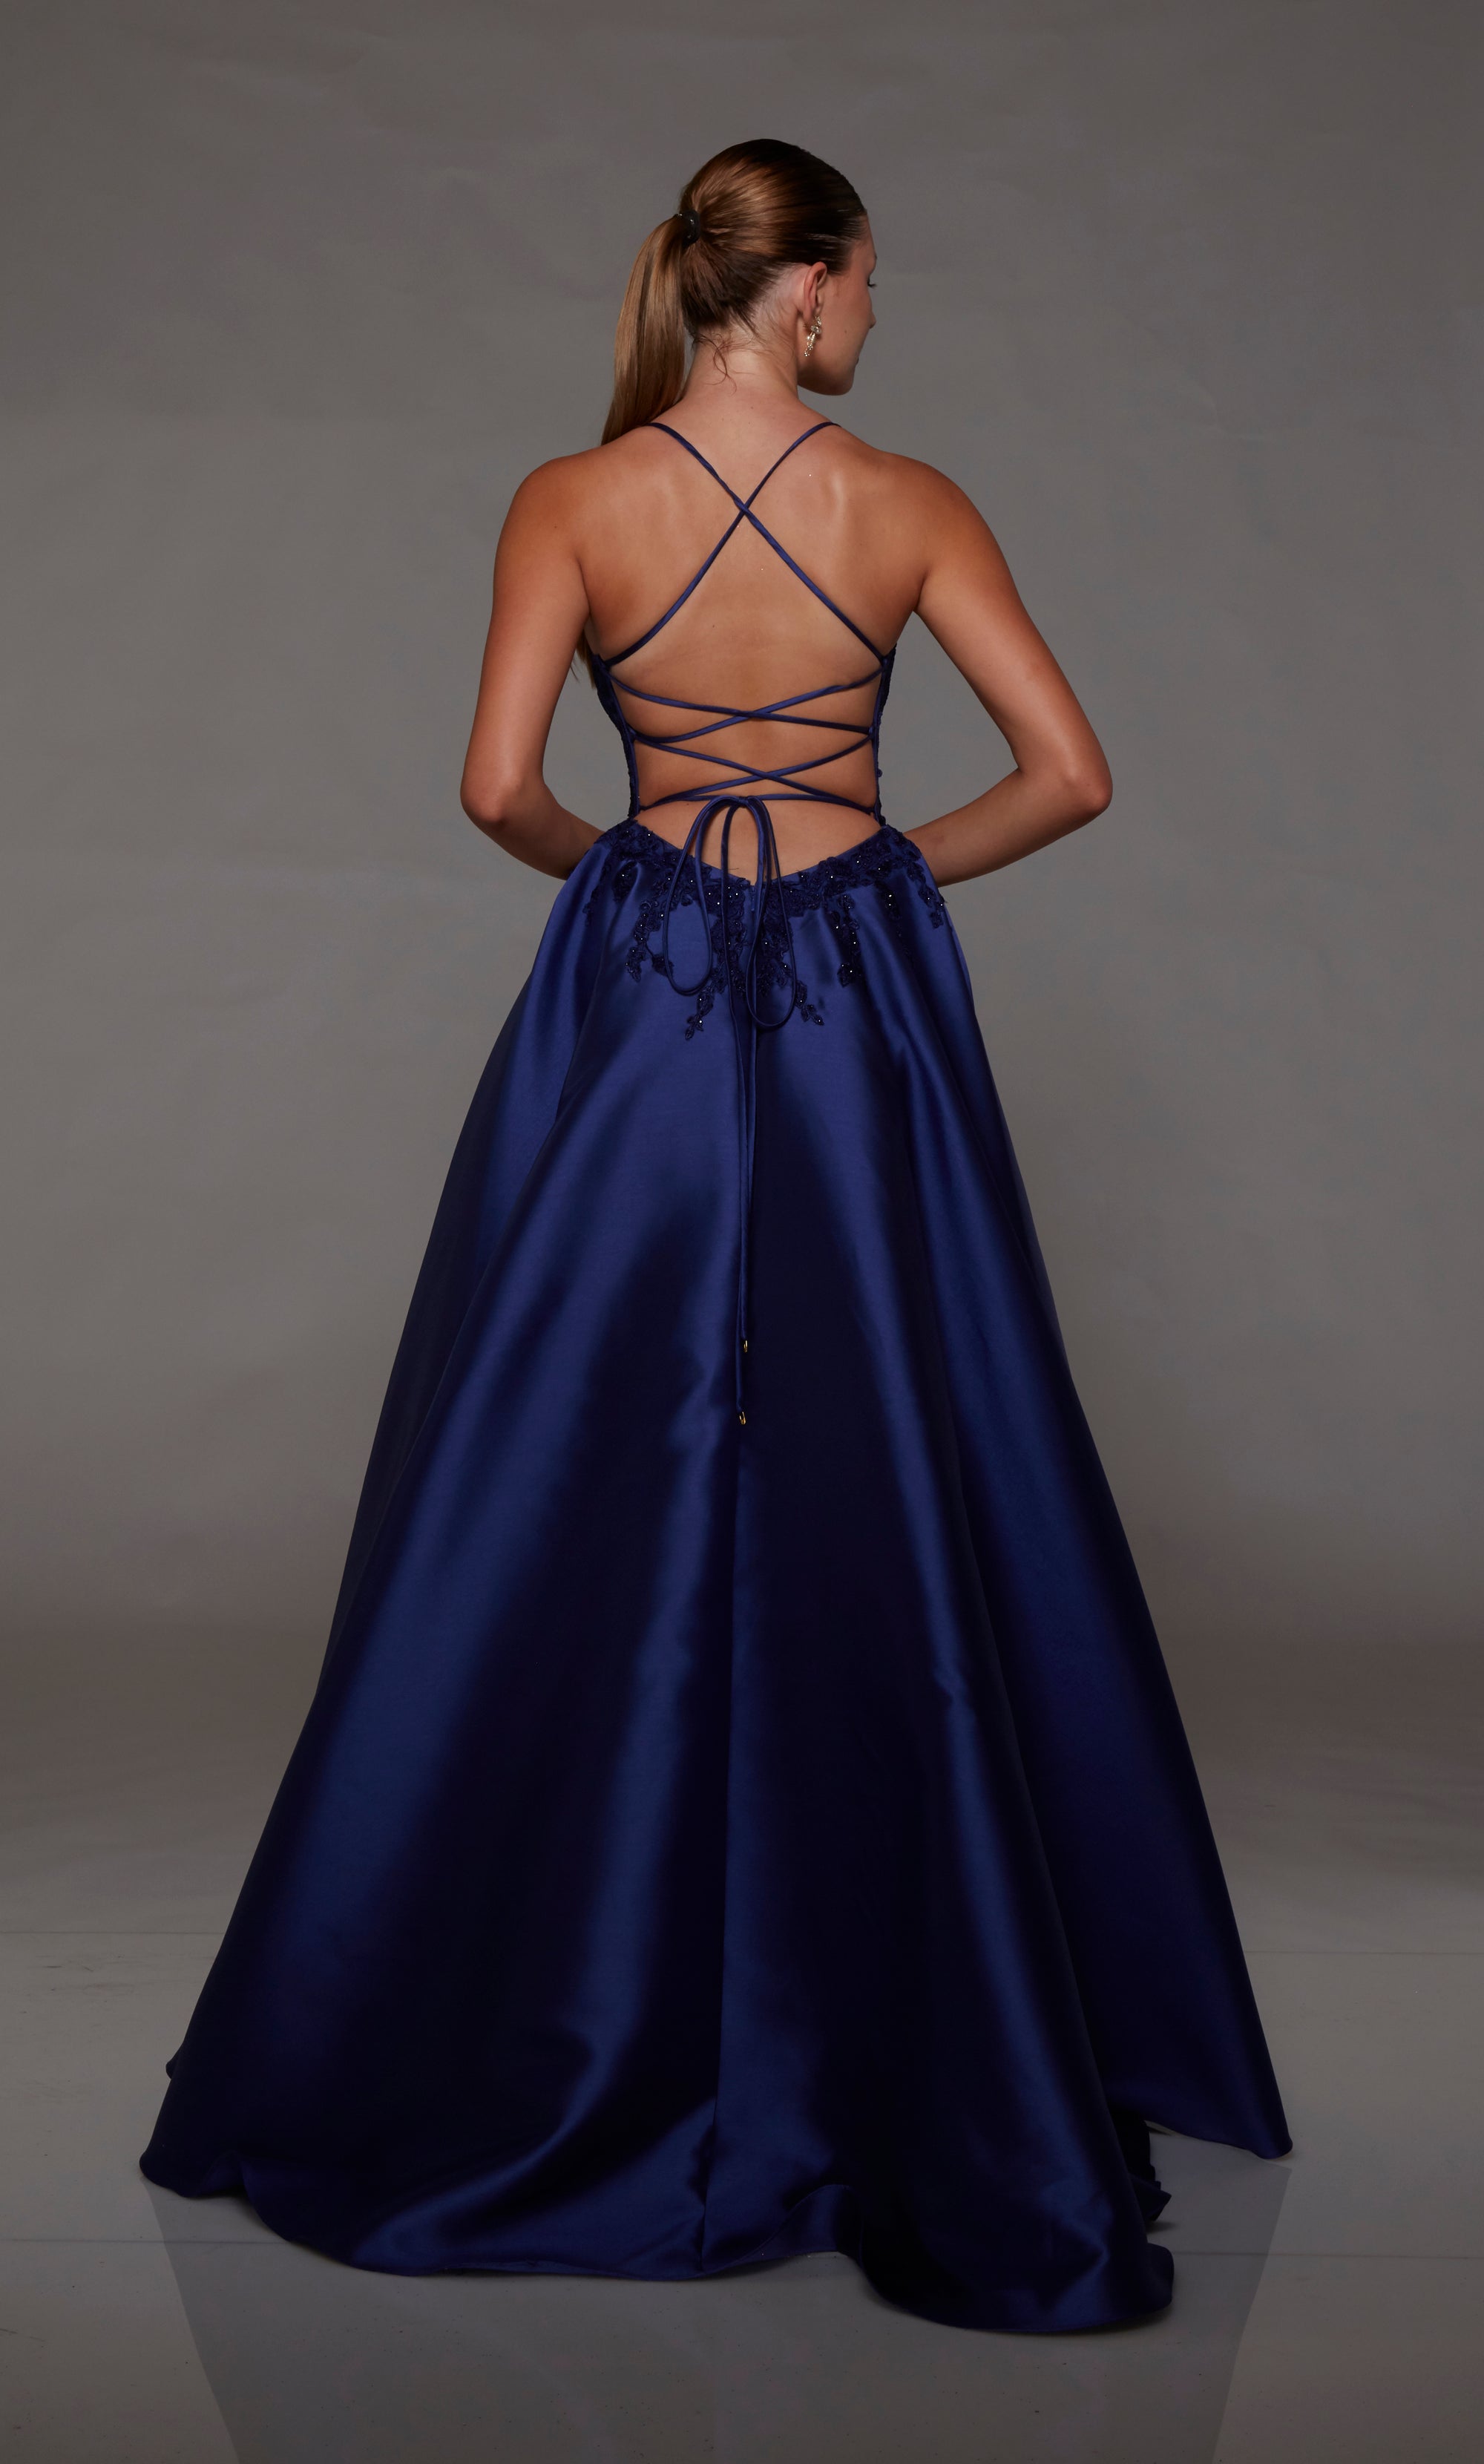 Navy mikado ball gown with lace corset, strappy back, and slight train for an stylish and vibrant look.